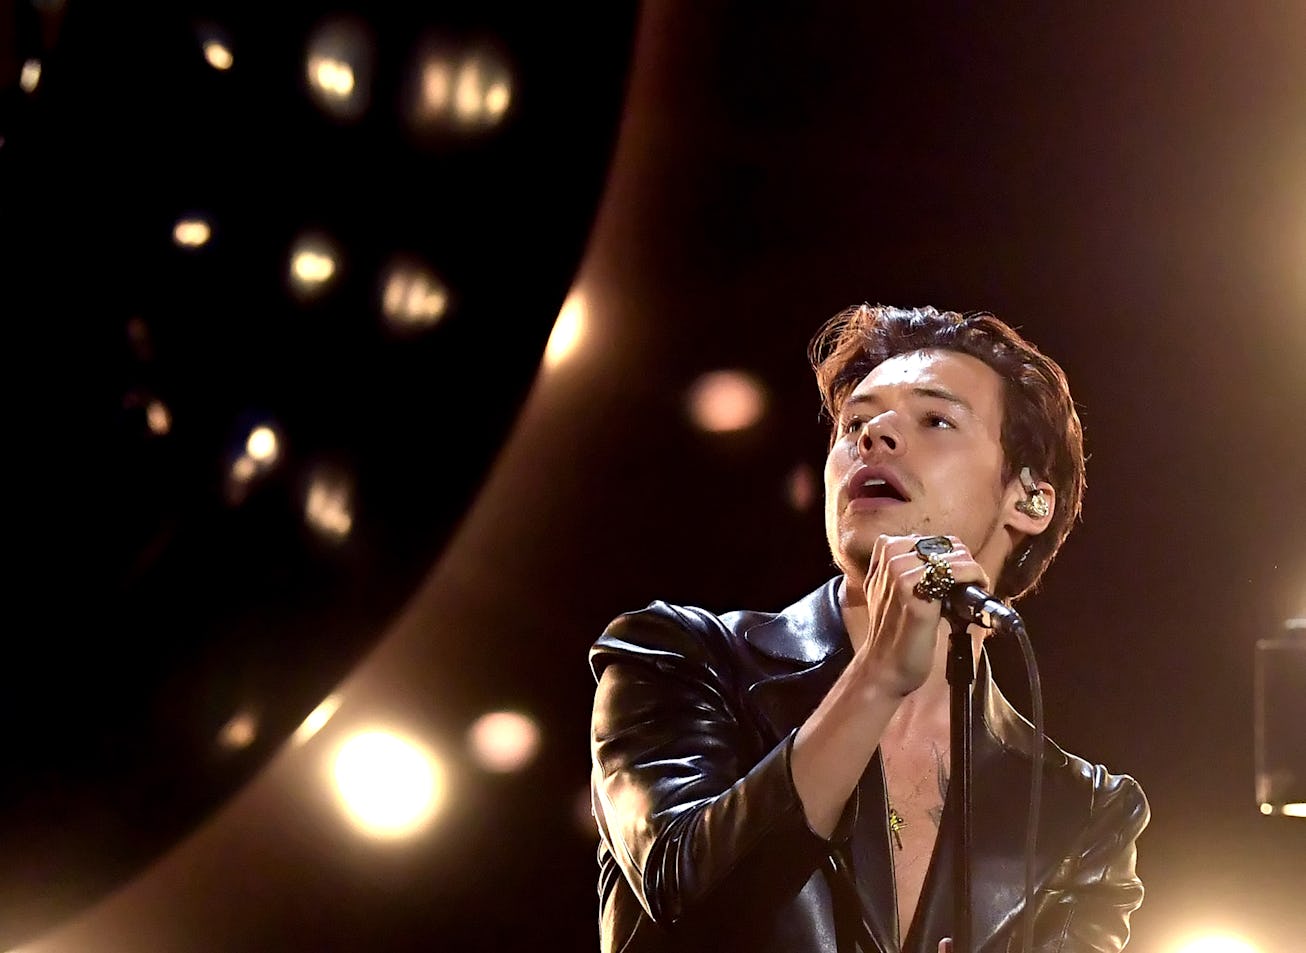 LOS ANGELES, CALIFORNIA: In this image released on March 14, Harry Styles performs onstage during th...